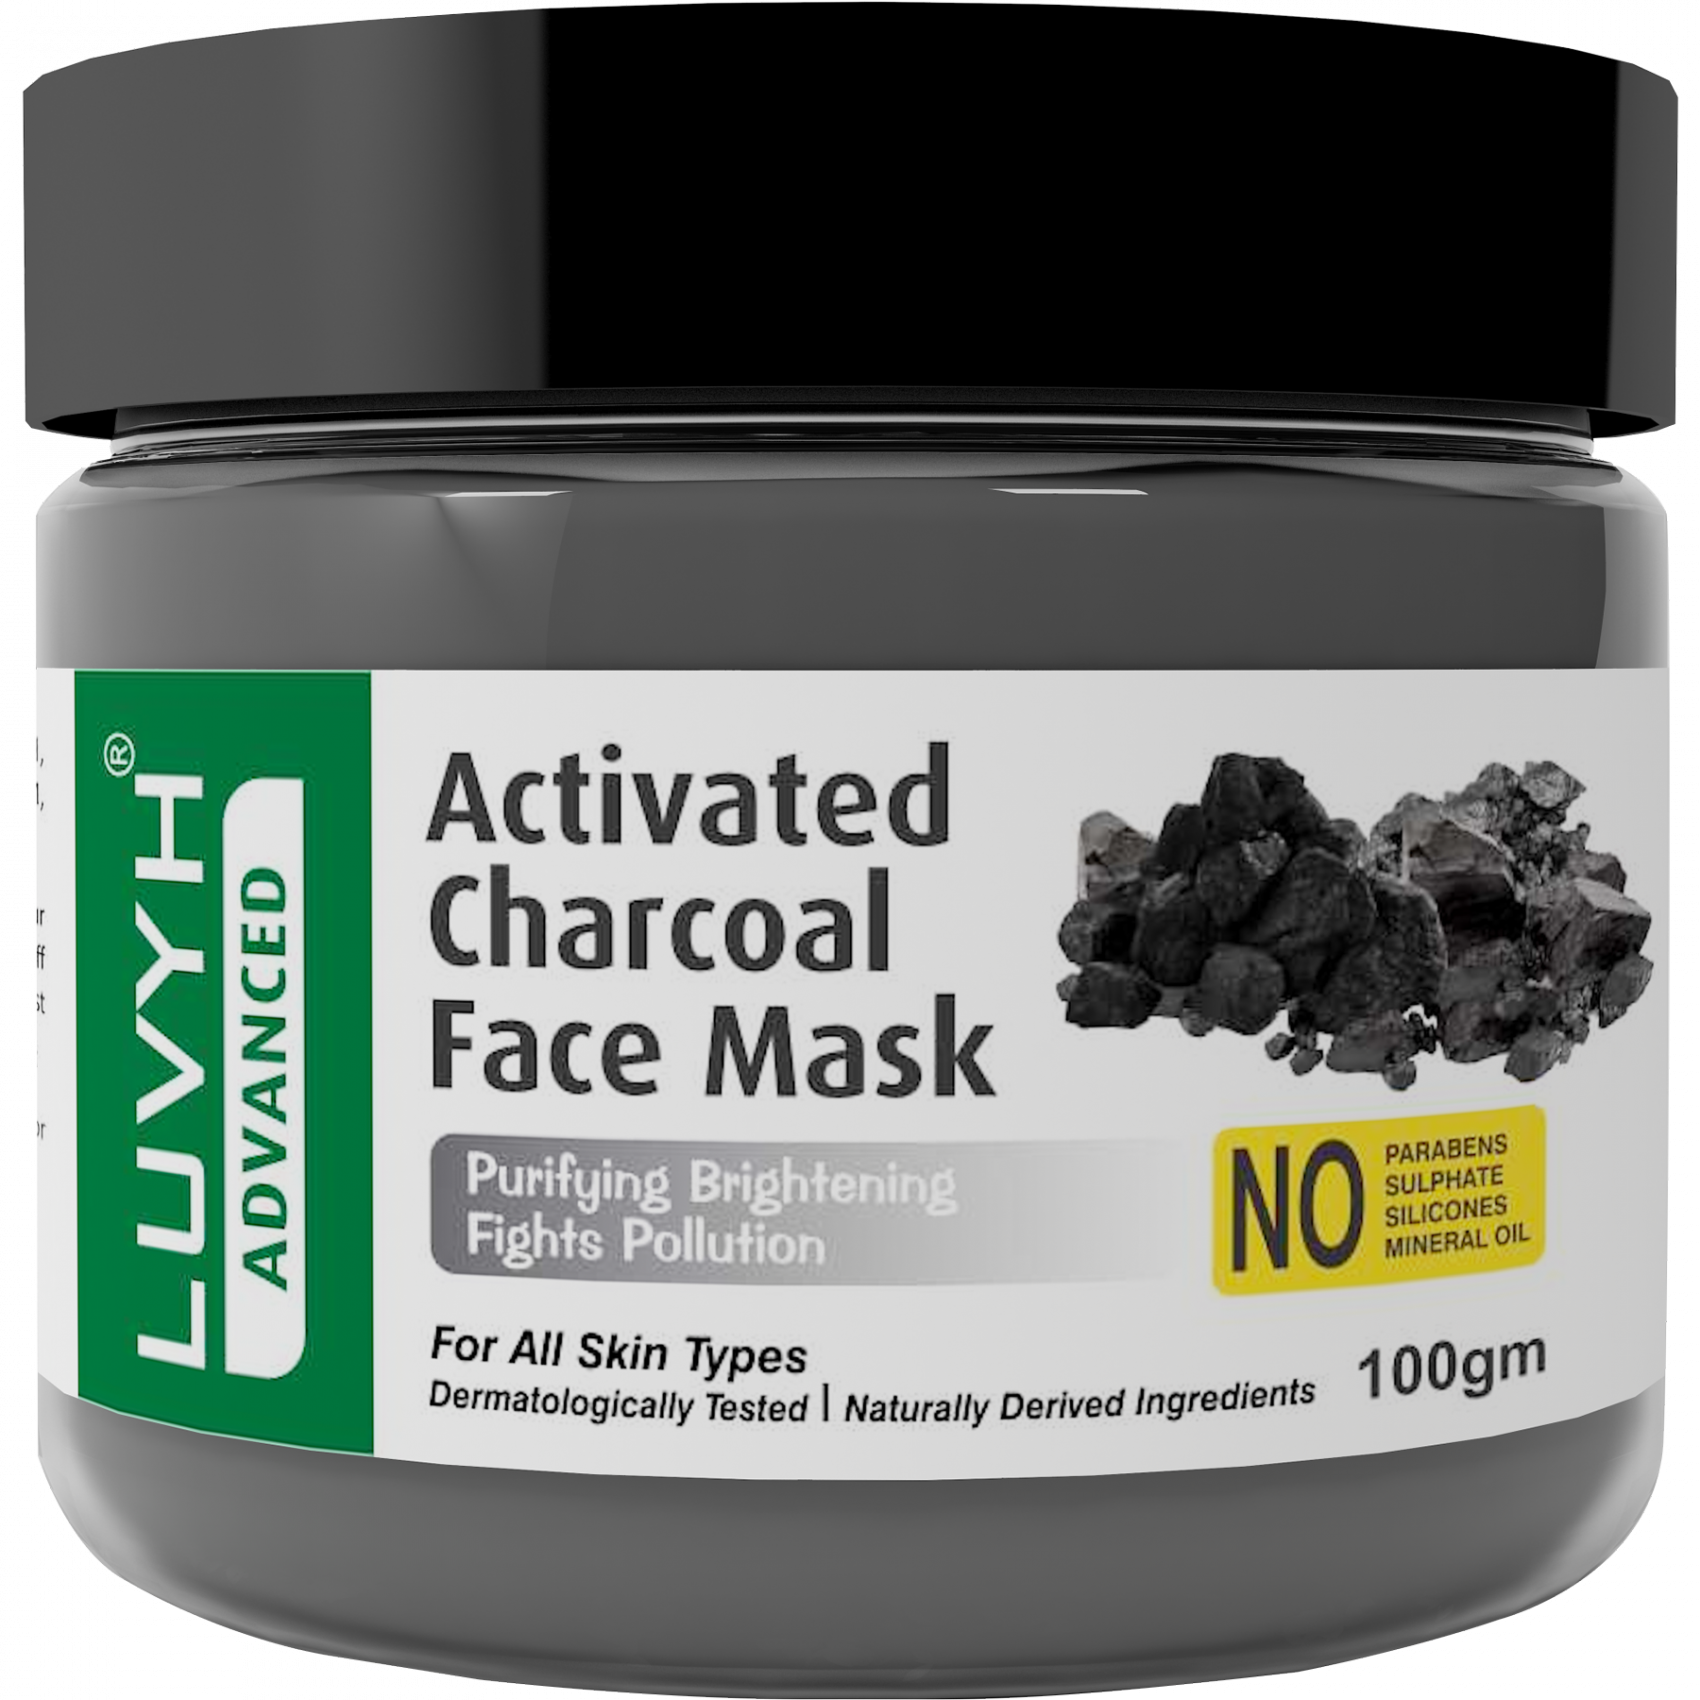 Activated Charcoal Face Mask Best for Brightening